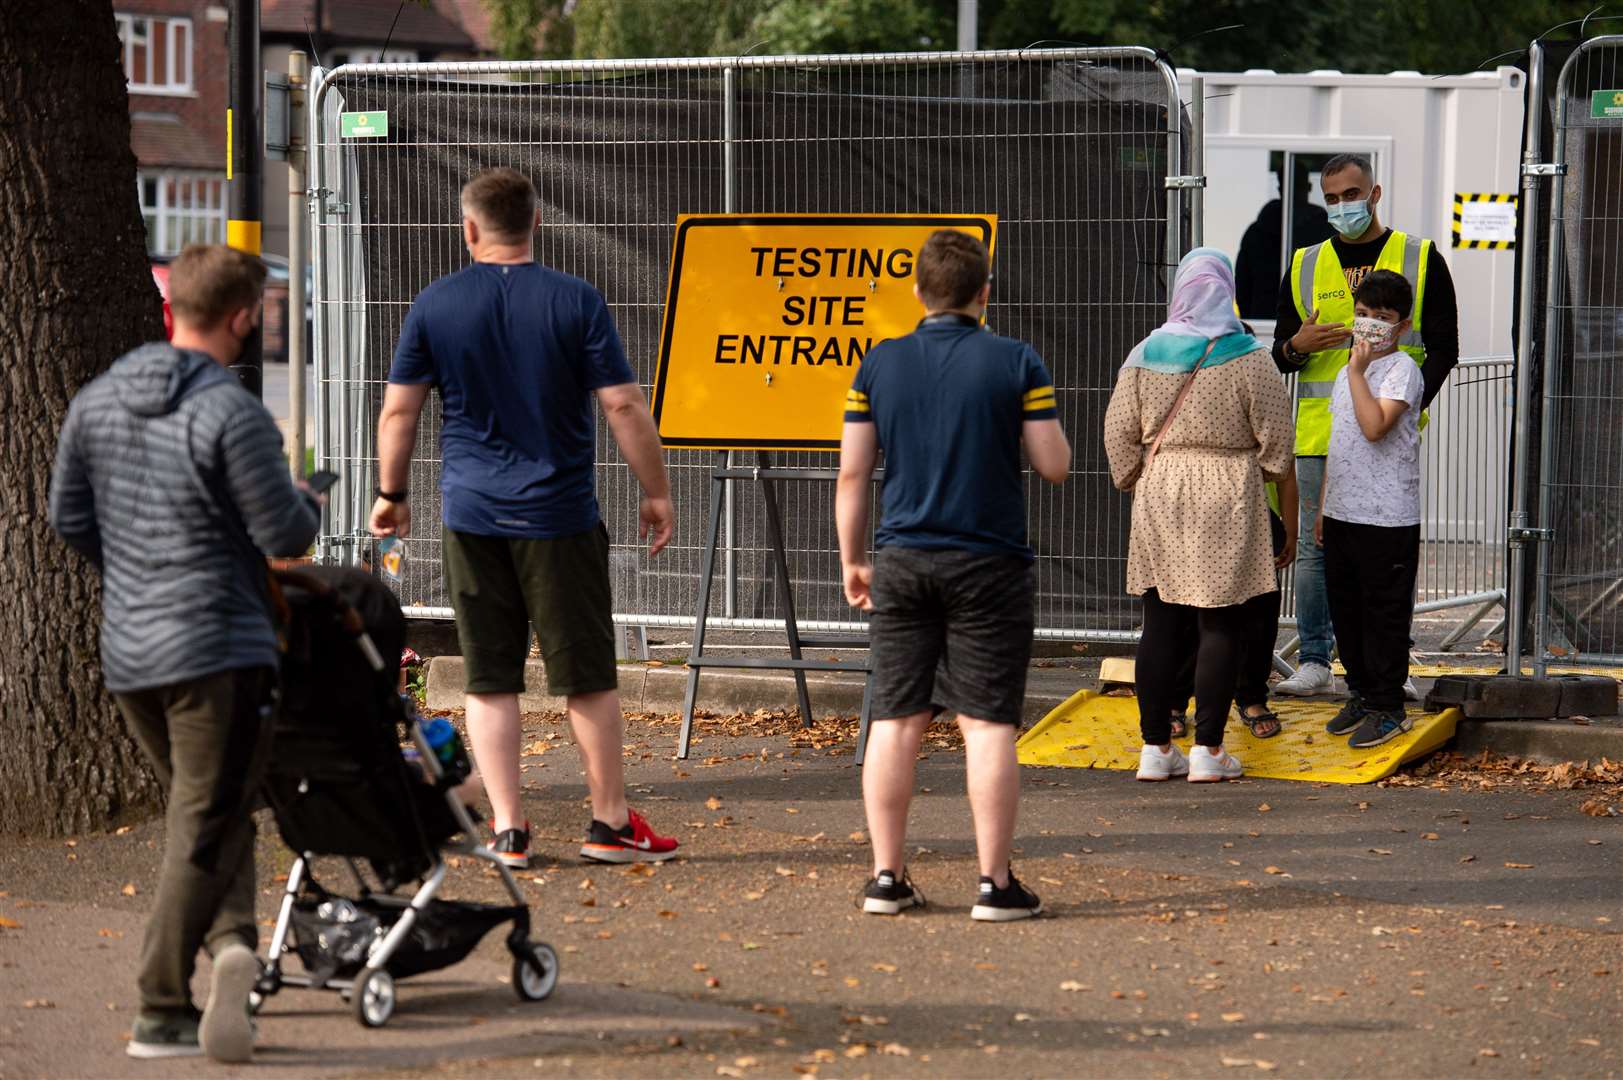 Members of the public queue at a coronavirus testing facility in Sutton Coldfield, Birmingham (Jacob King/PA)